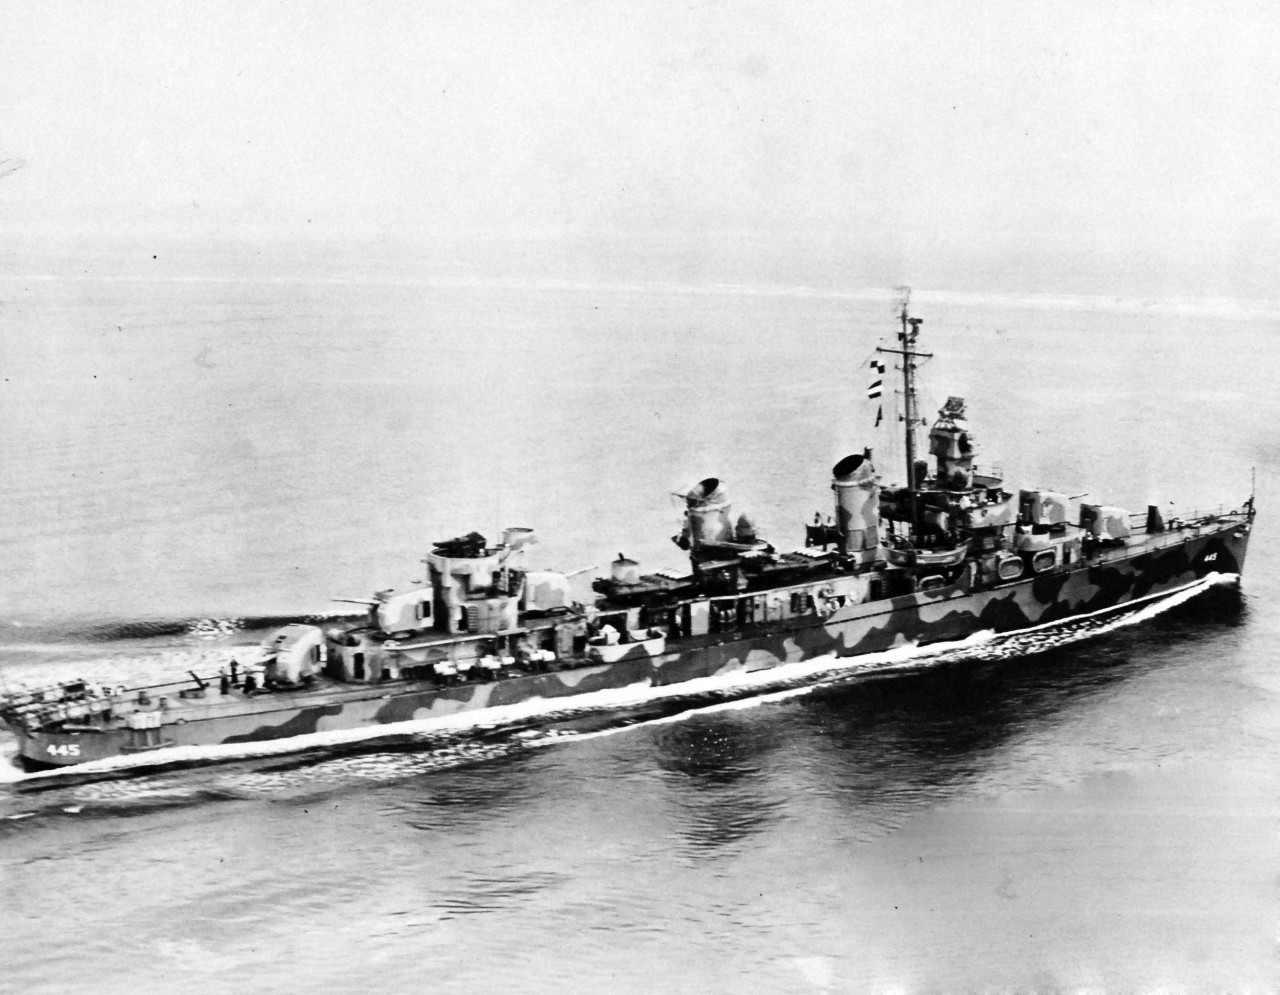 80-G-15837:  USS Fletcher (DD-445), 1942.  Official U.S. Navy Photograph, now in the collections of the National Archives.  (2017/09/19).  